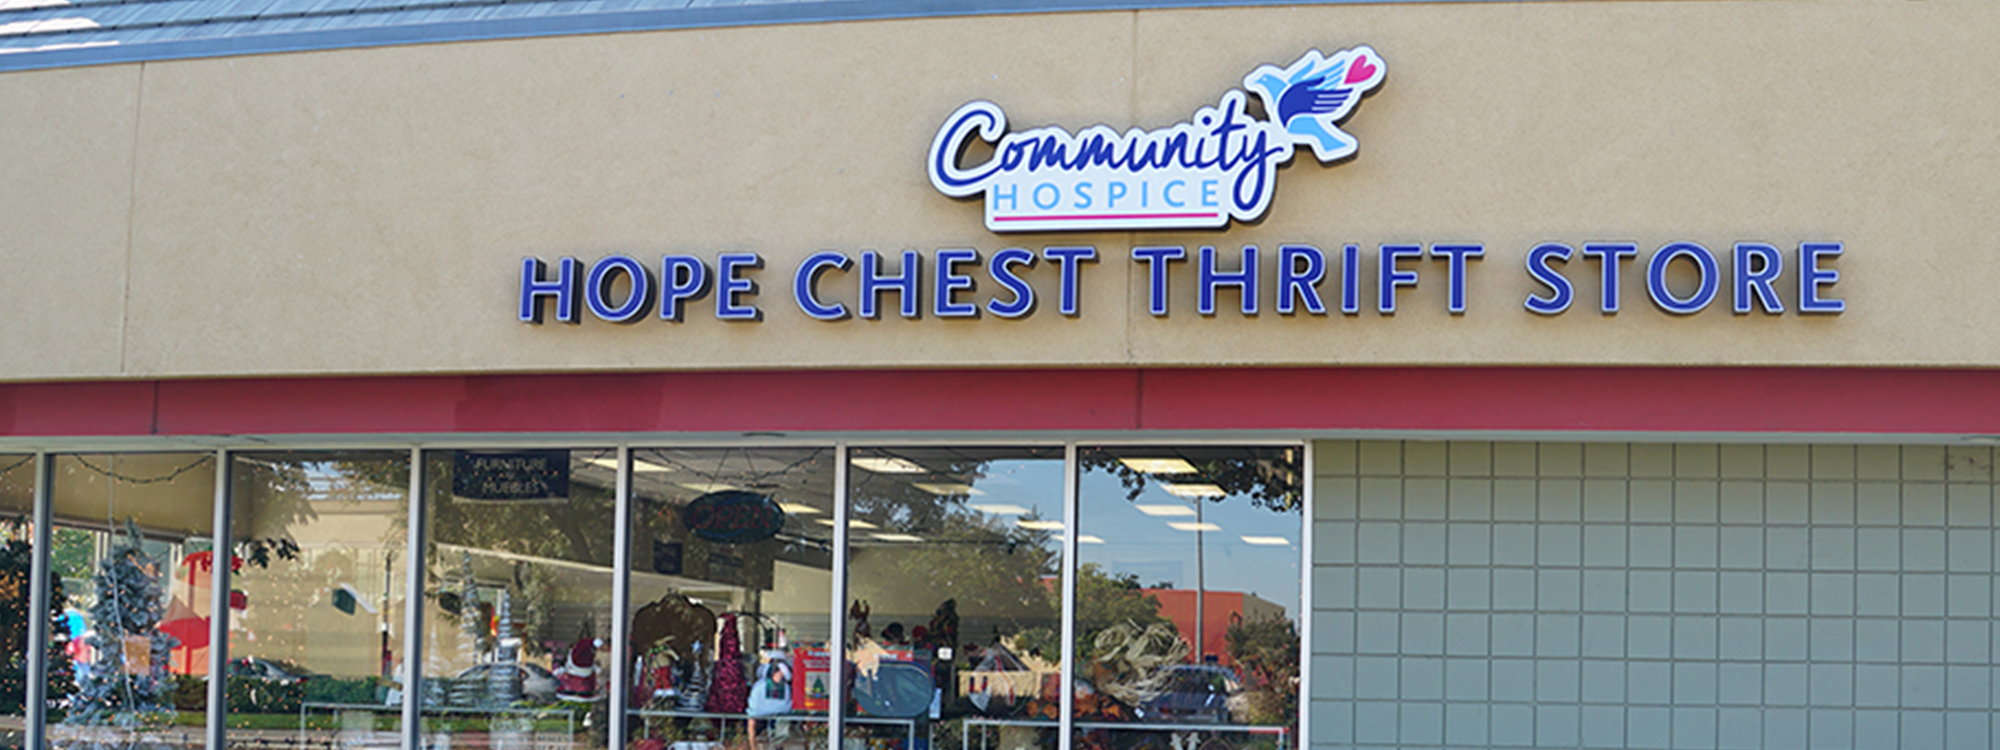 Community Hospice Hope Chest Thrift Store